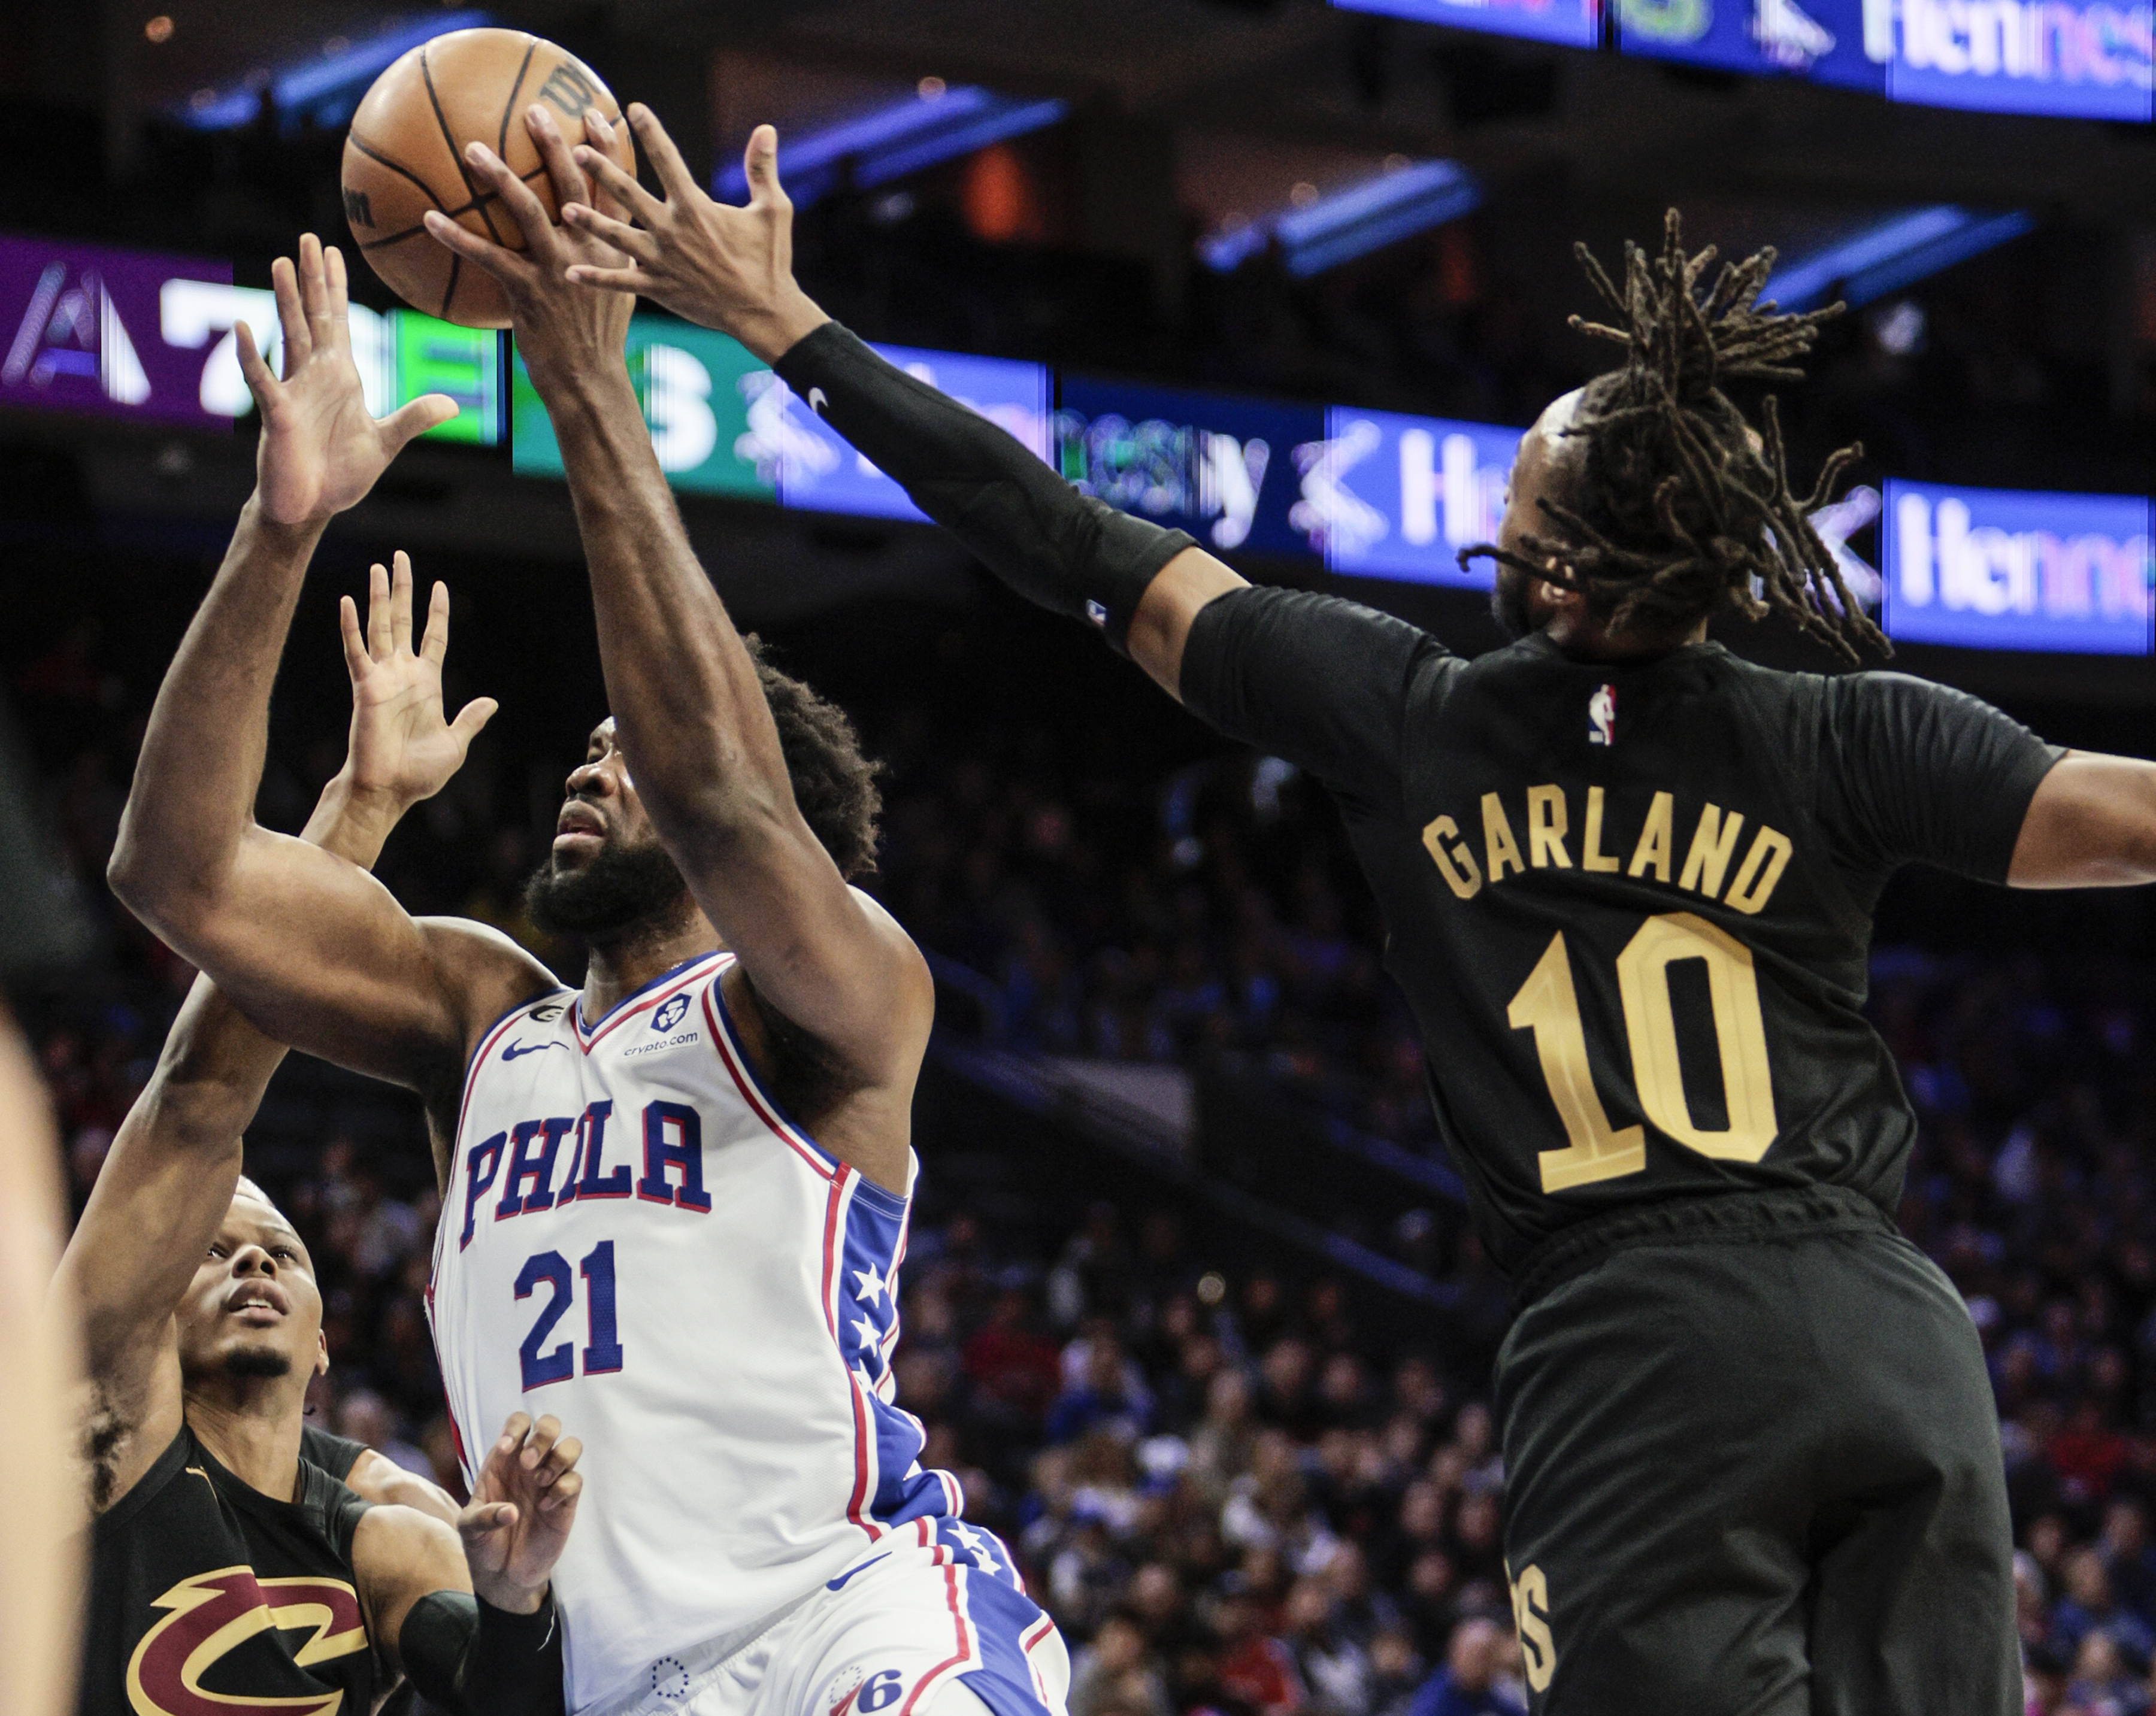 Joel Embiid was the center of attention at NBA All-Star game - Los